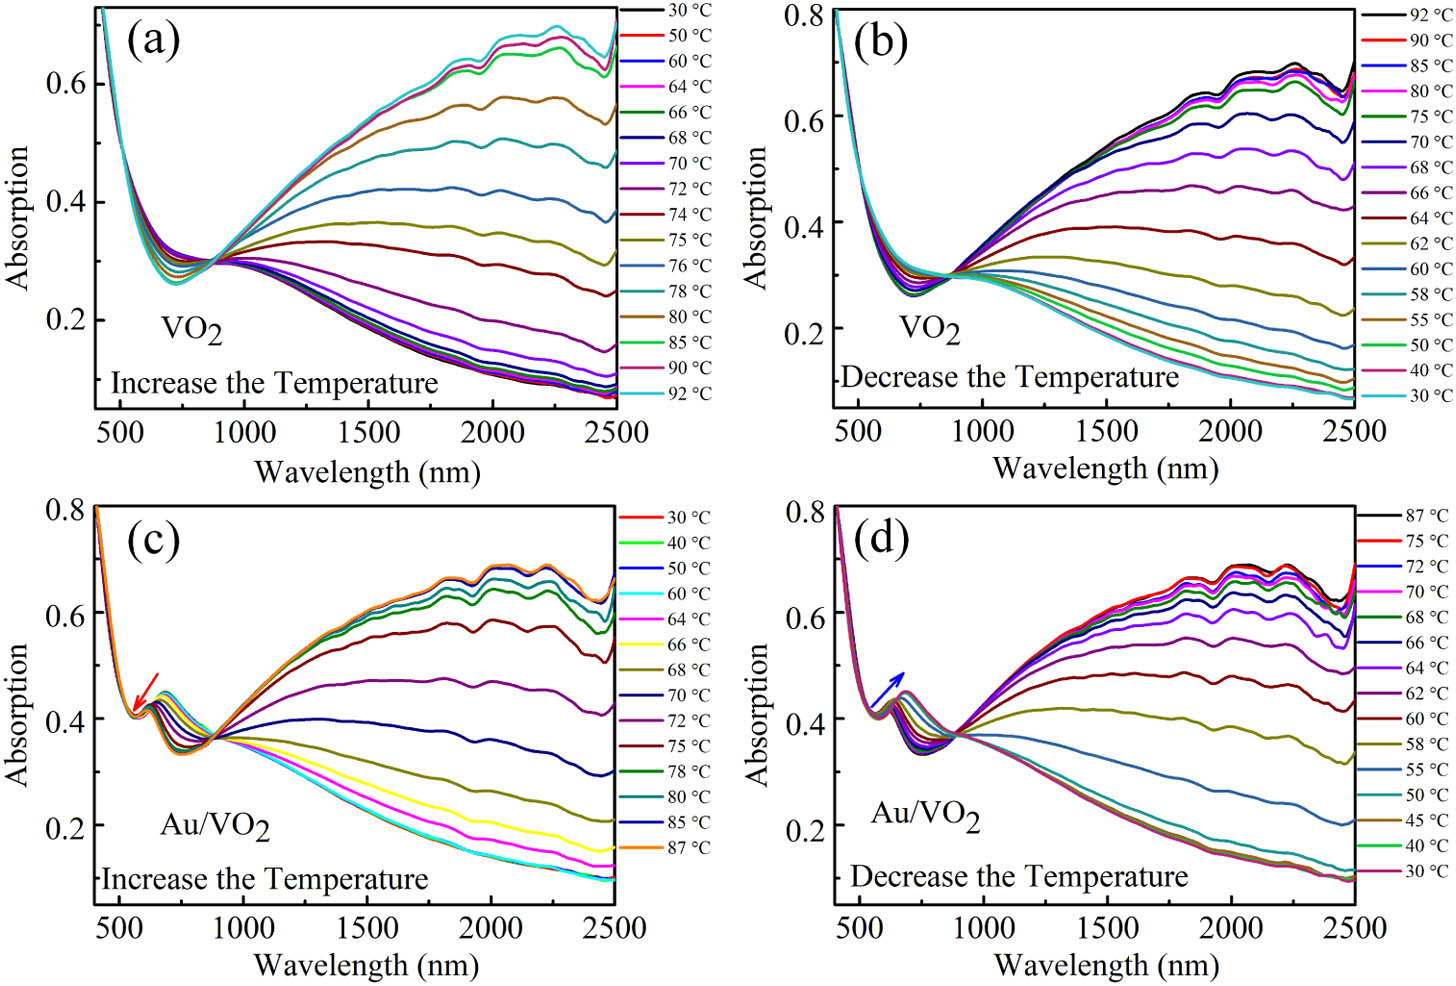 Experimental absorption spectra of bare VO2 and Au/VO2 films as a function of temperature. Heating [(a), (c)] and cooling [(b), (d)] on bare VO2 [(a), (b)] and Au/VO2 [(c), (d)] films. The arrows in (c) and (d) indicate the moving direction of the plasmonic peak with the change of temperature (red: heating; blue: cooling).